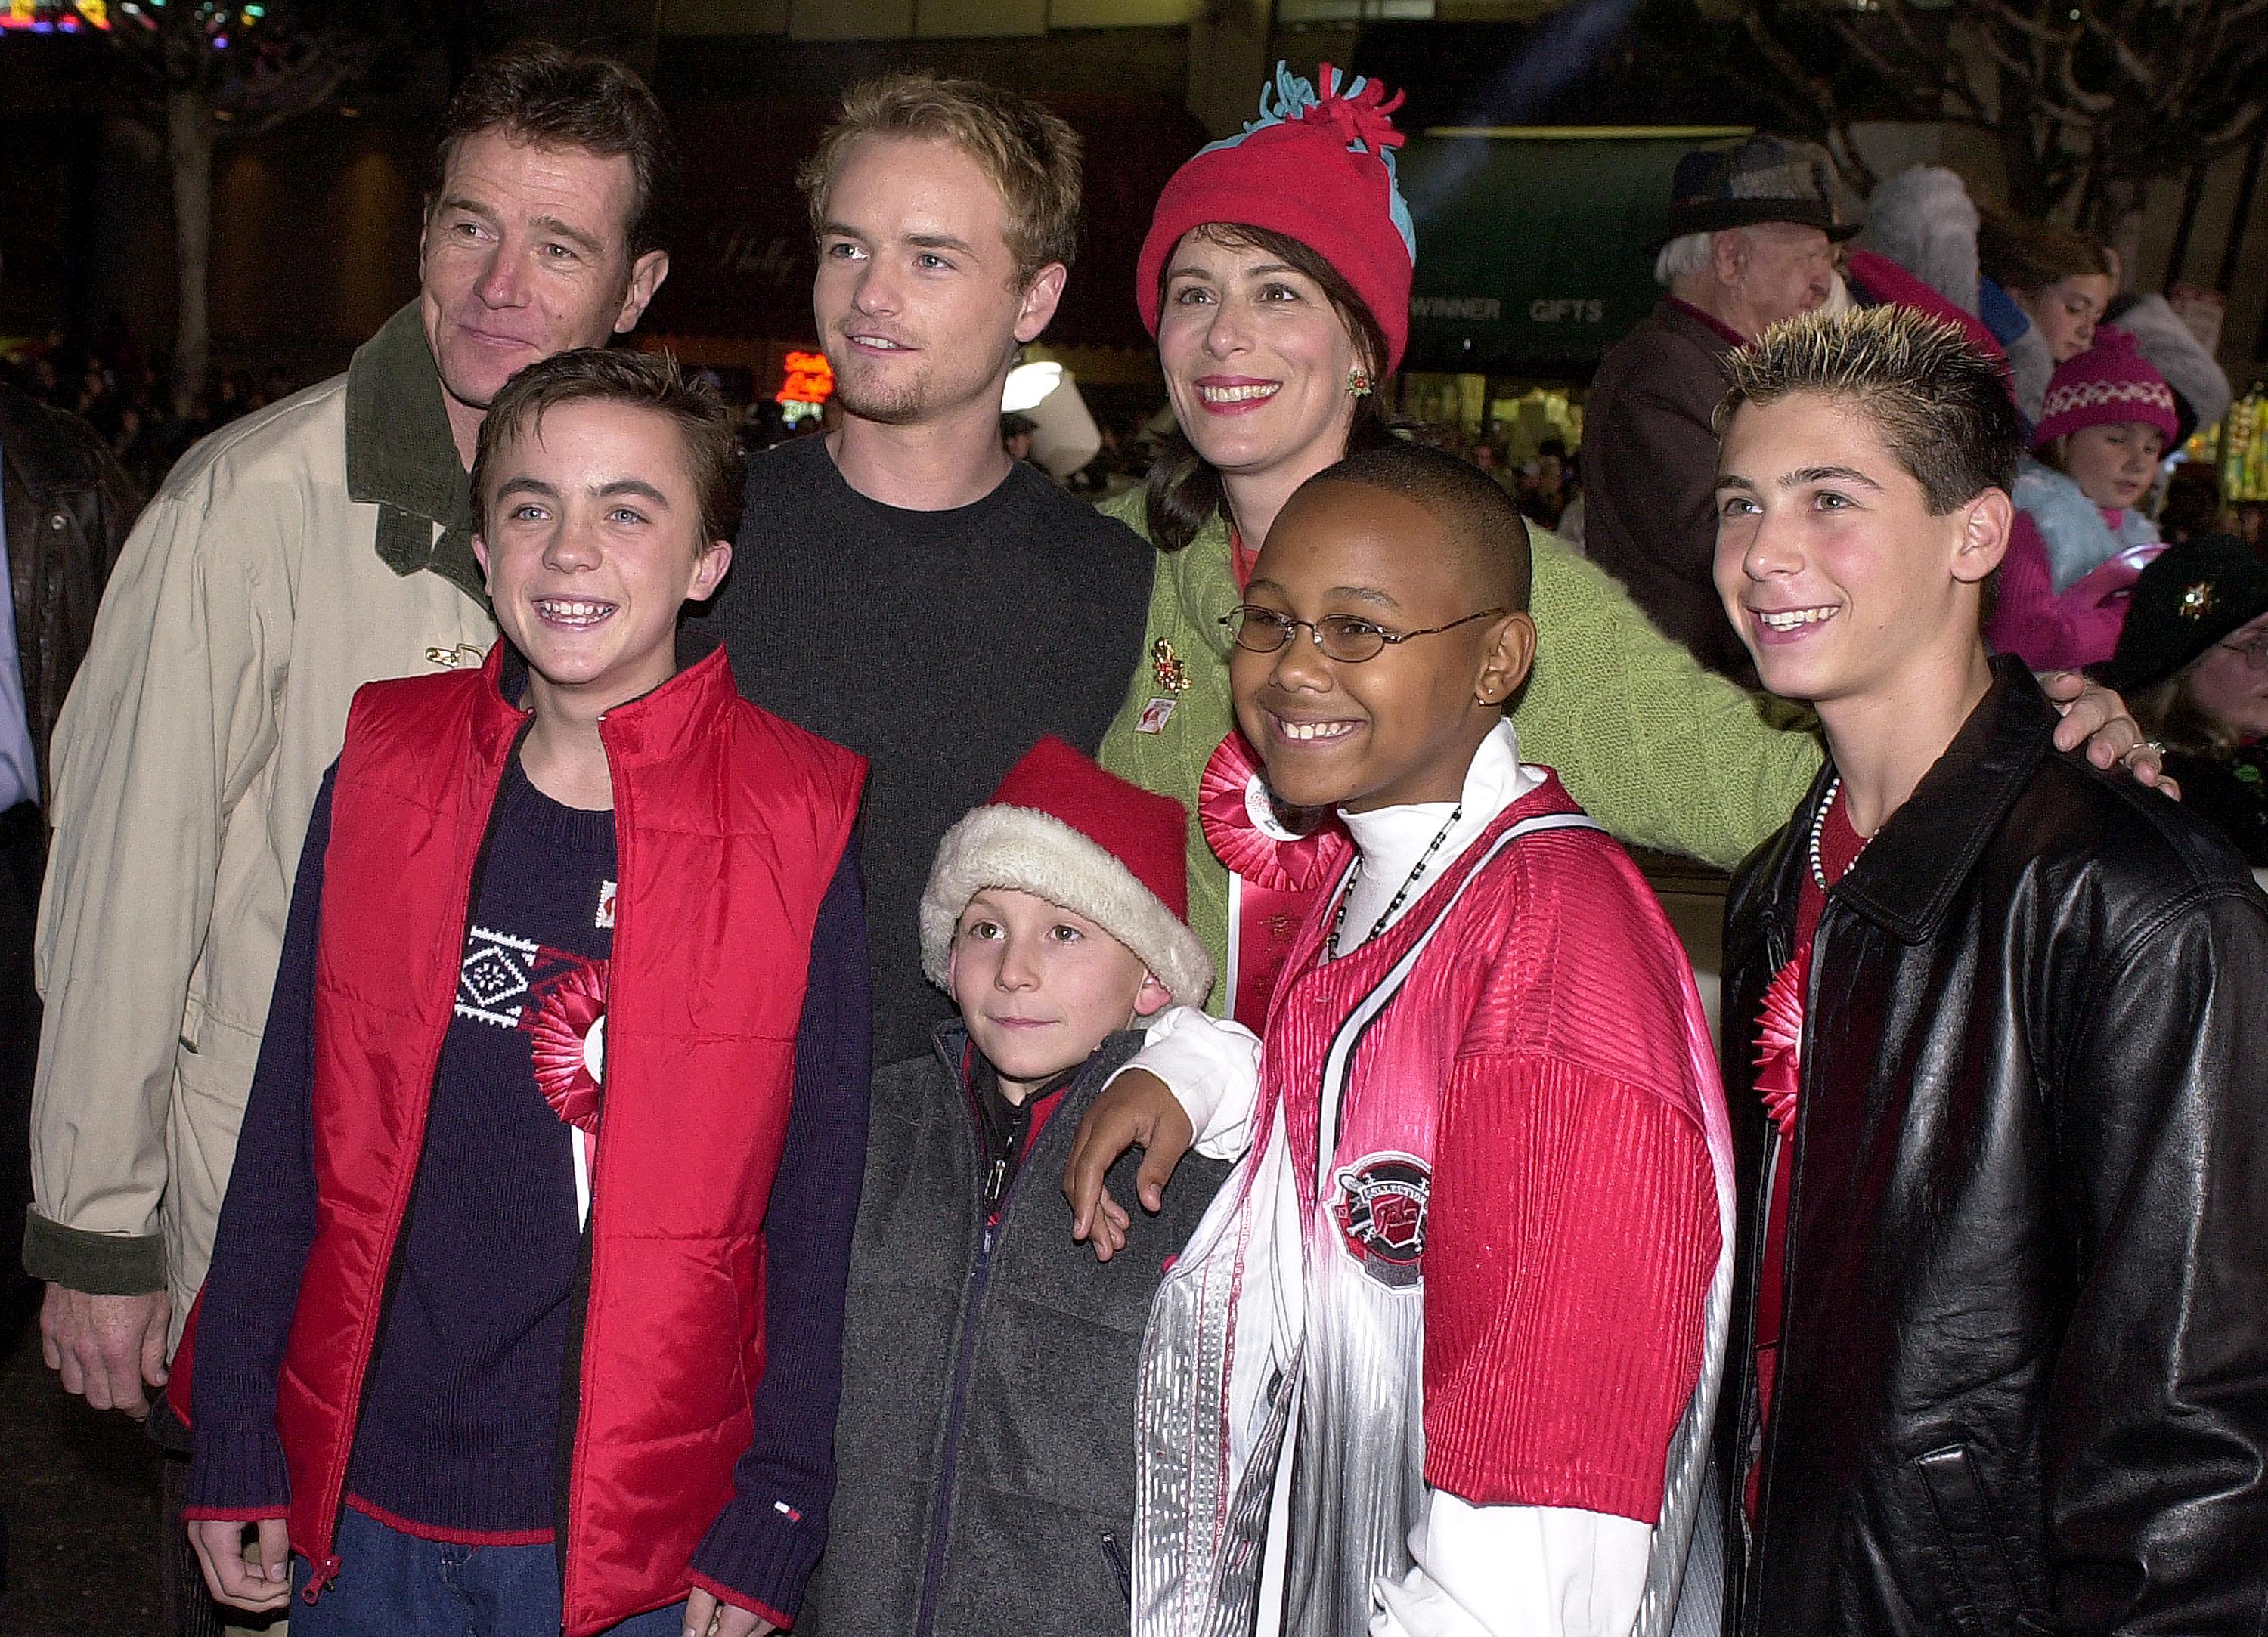 The Malcolm cast at the Hollywood Christmas Parade